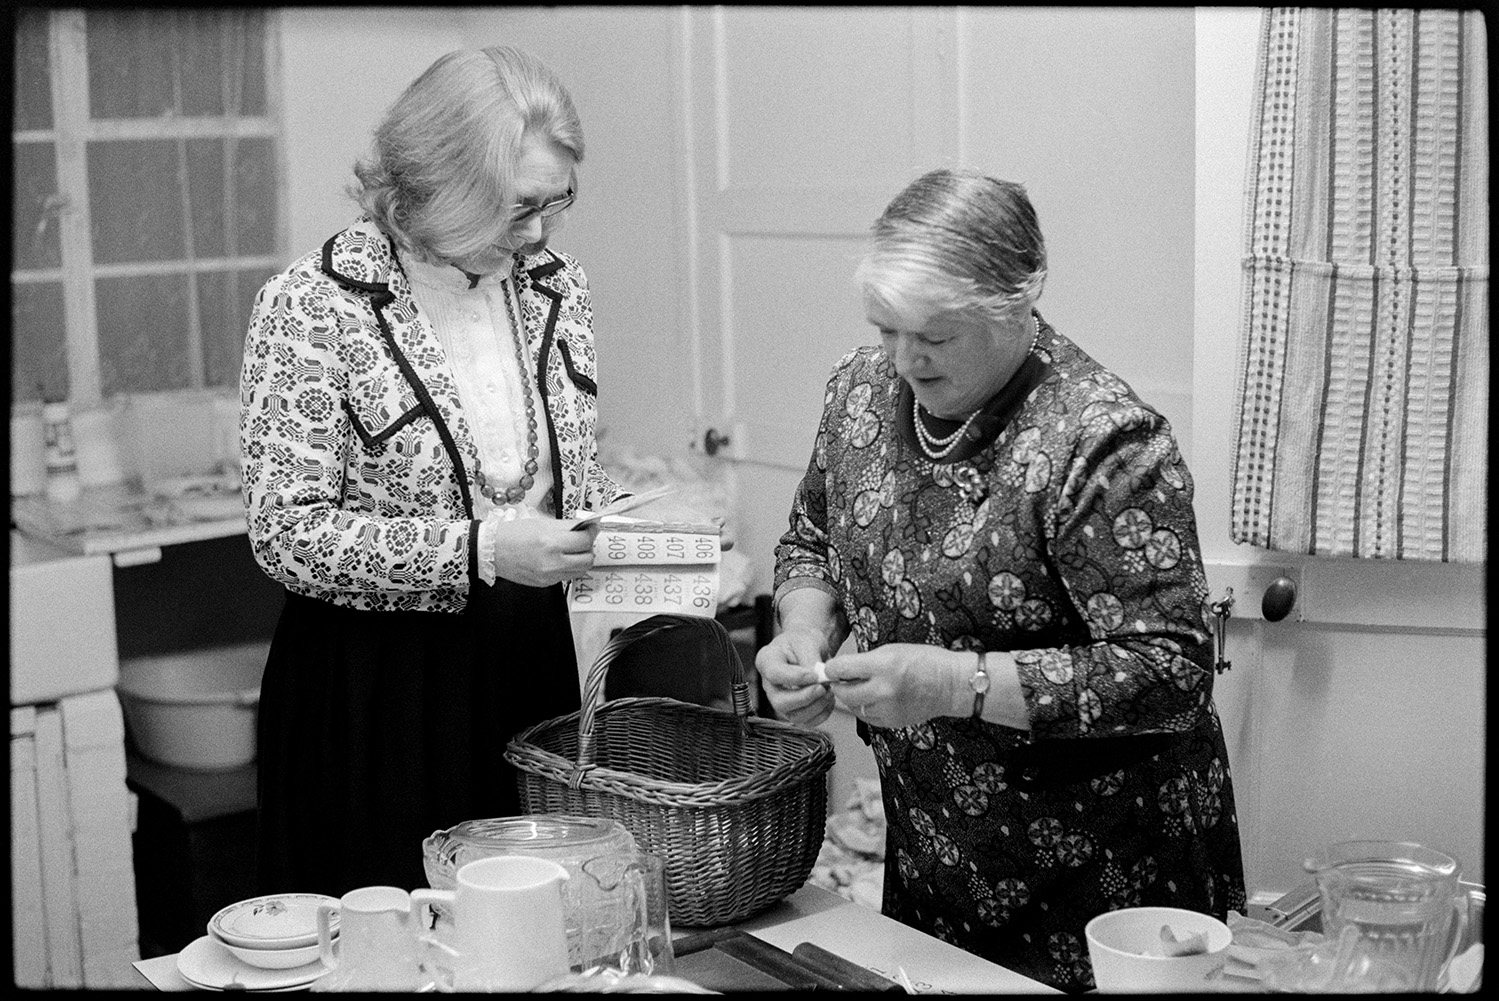 Women preparing food for harvest supper. 
[Mrs Rickman and Mrs Isaacs ripping up raffle tickets and putting them in wicker basket at the harvest supper in Roborough Village Hall. They are working on a table with jugs and plates.]